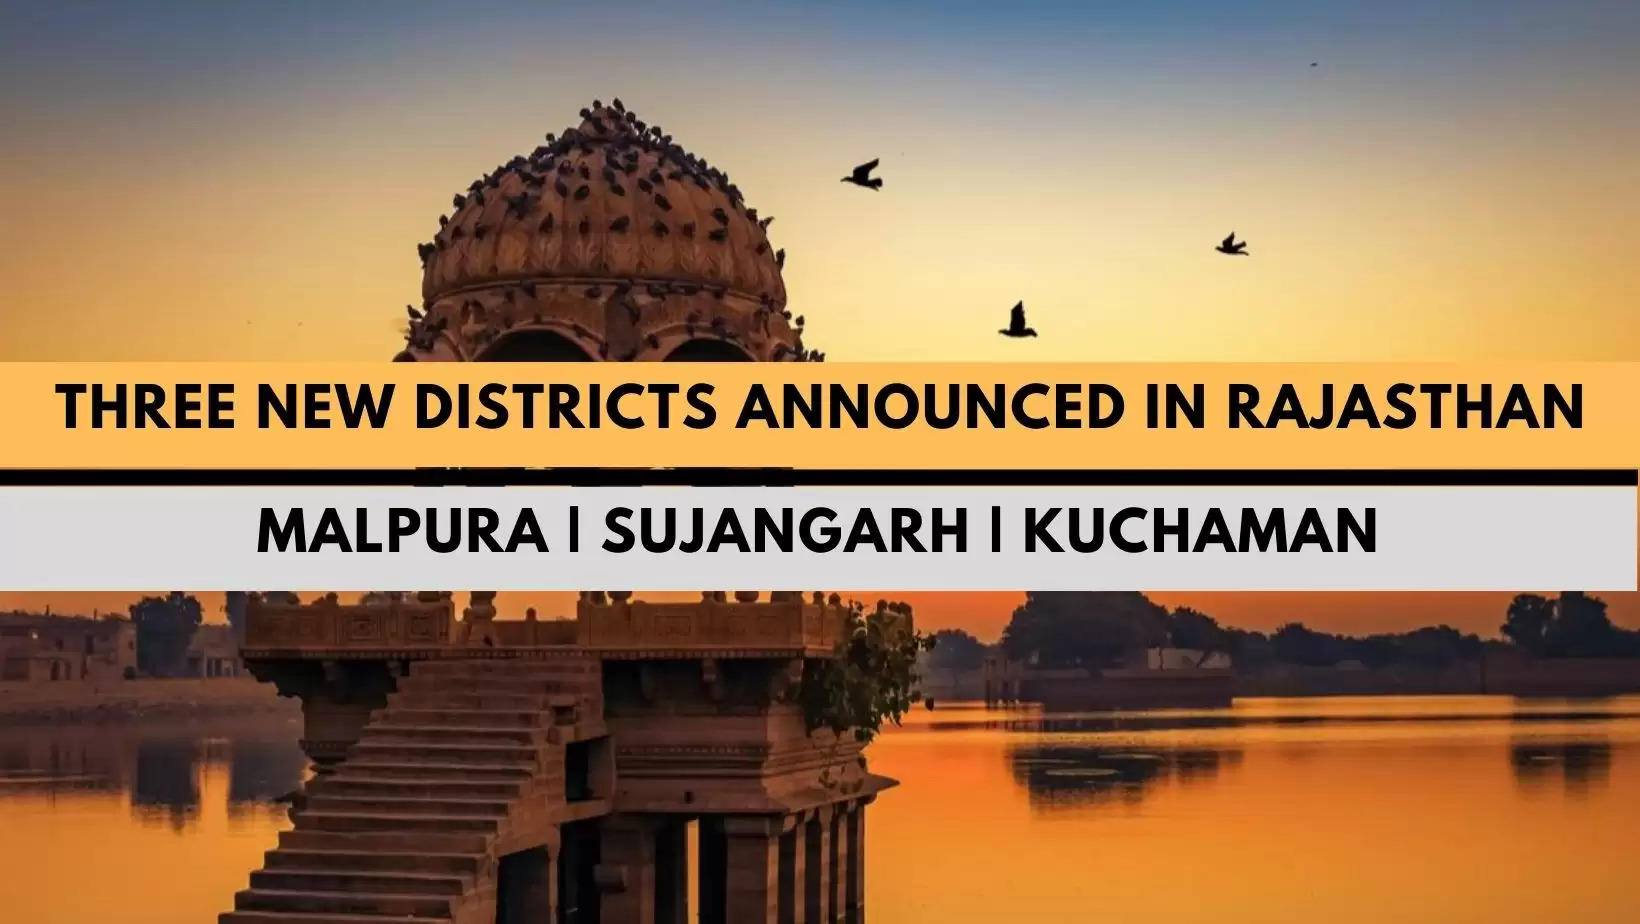 Three new district announced by the rajasthan government chief minister ashok gehlot ahead of rajasthan elections